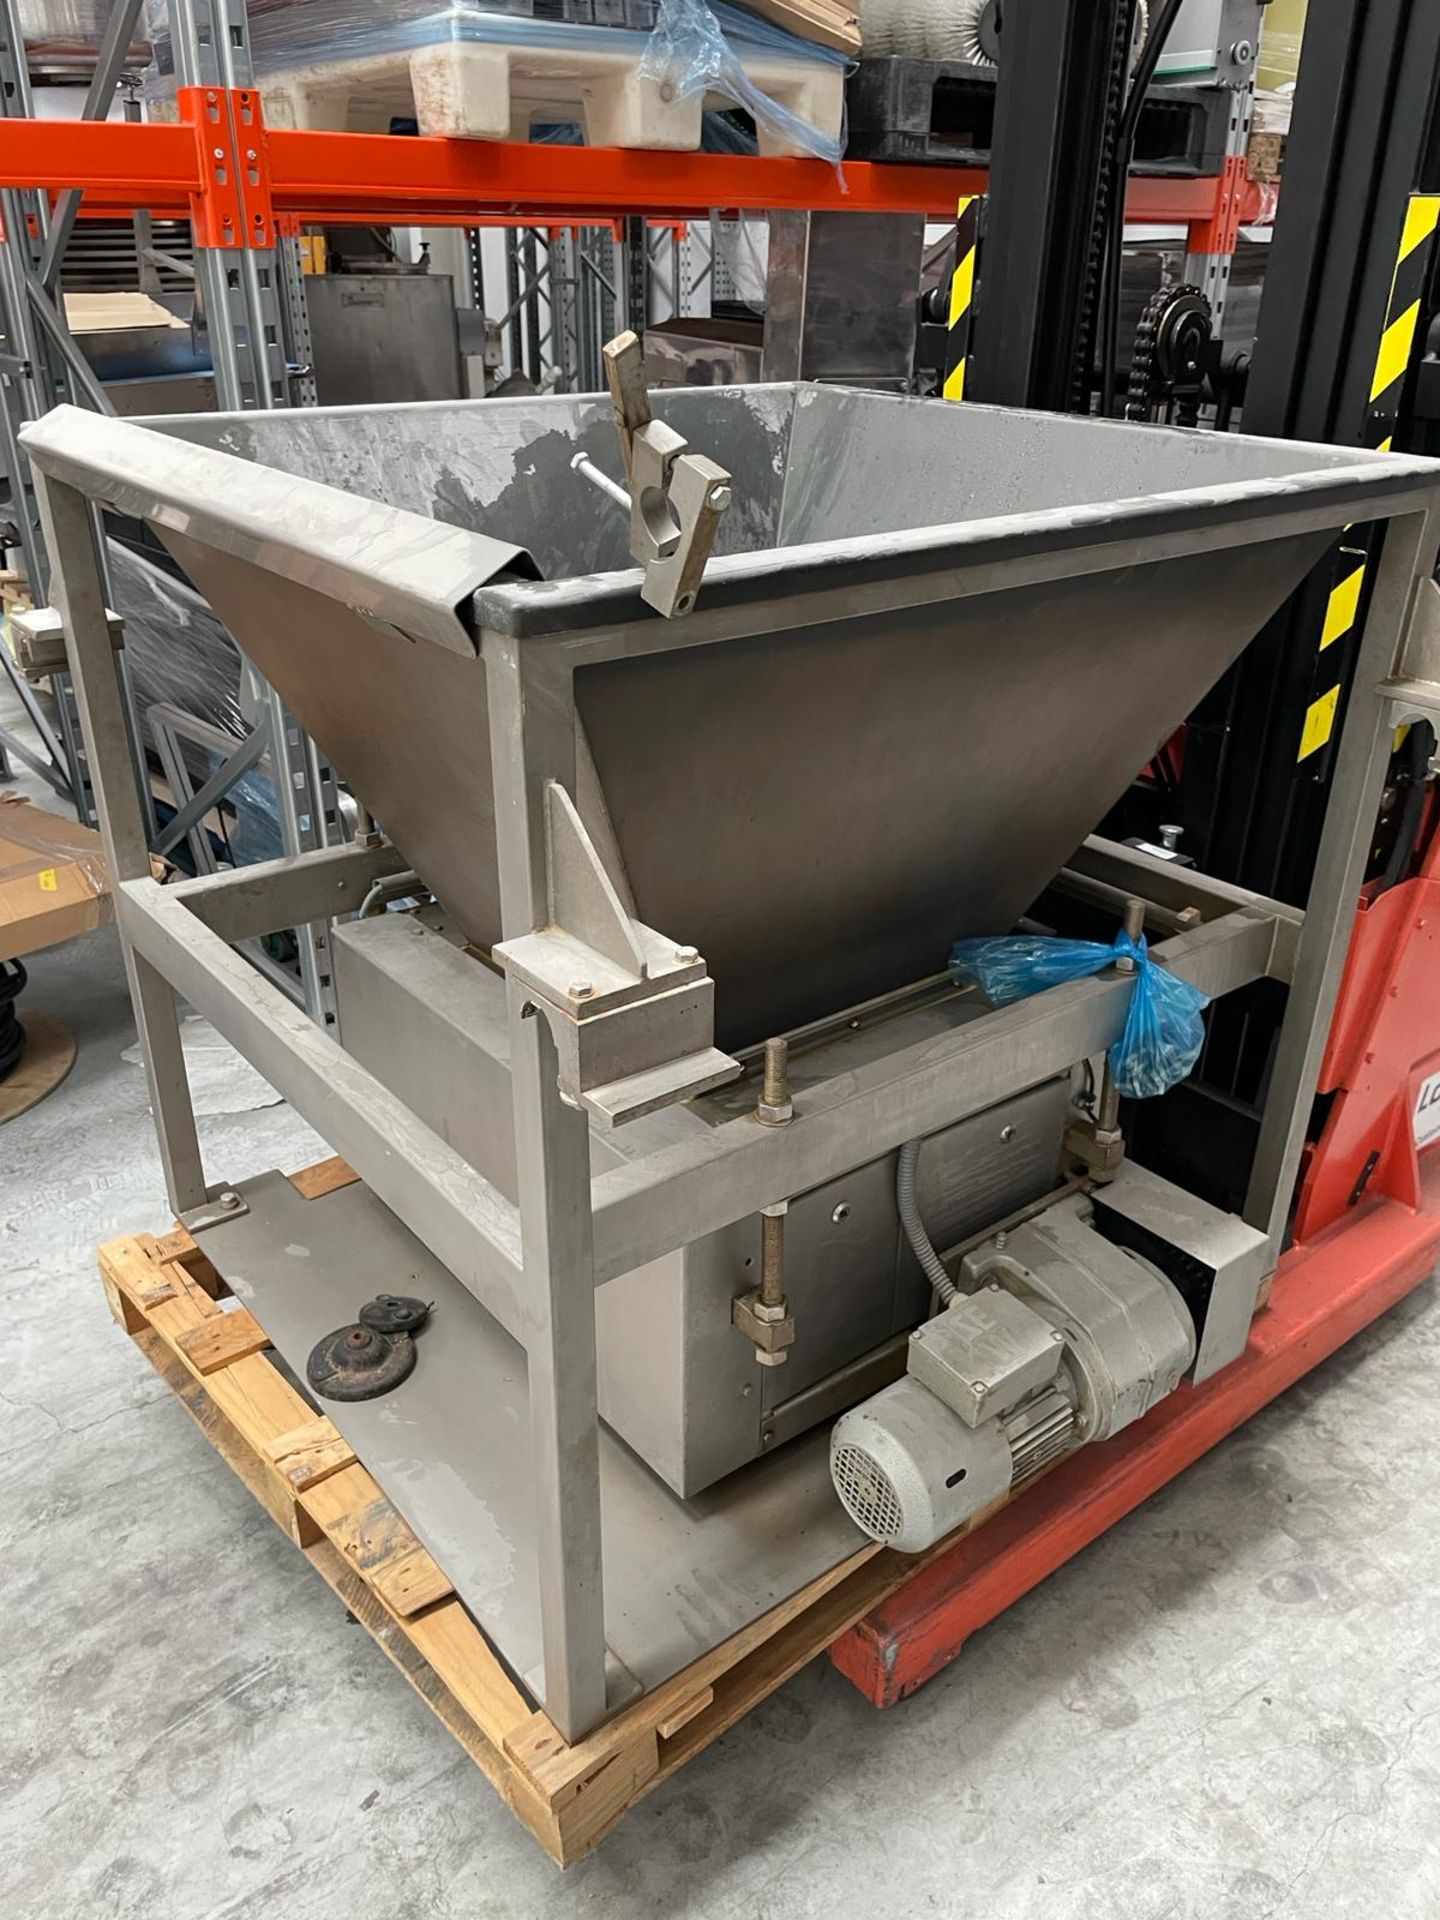 Stainless Steel Dough hopper on frame. SEW Drive. 1000 x 1000 x 900 mm deep. Please note this lot is